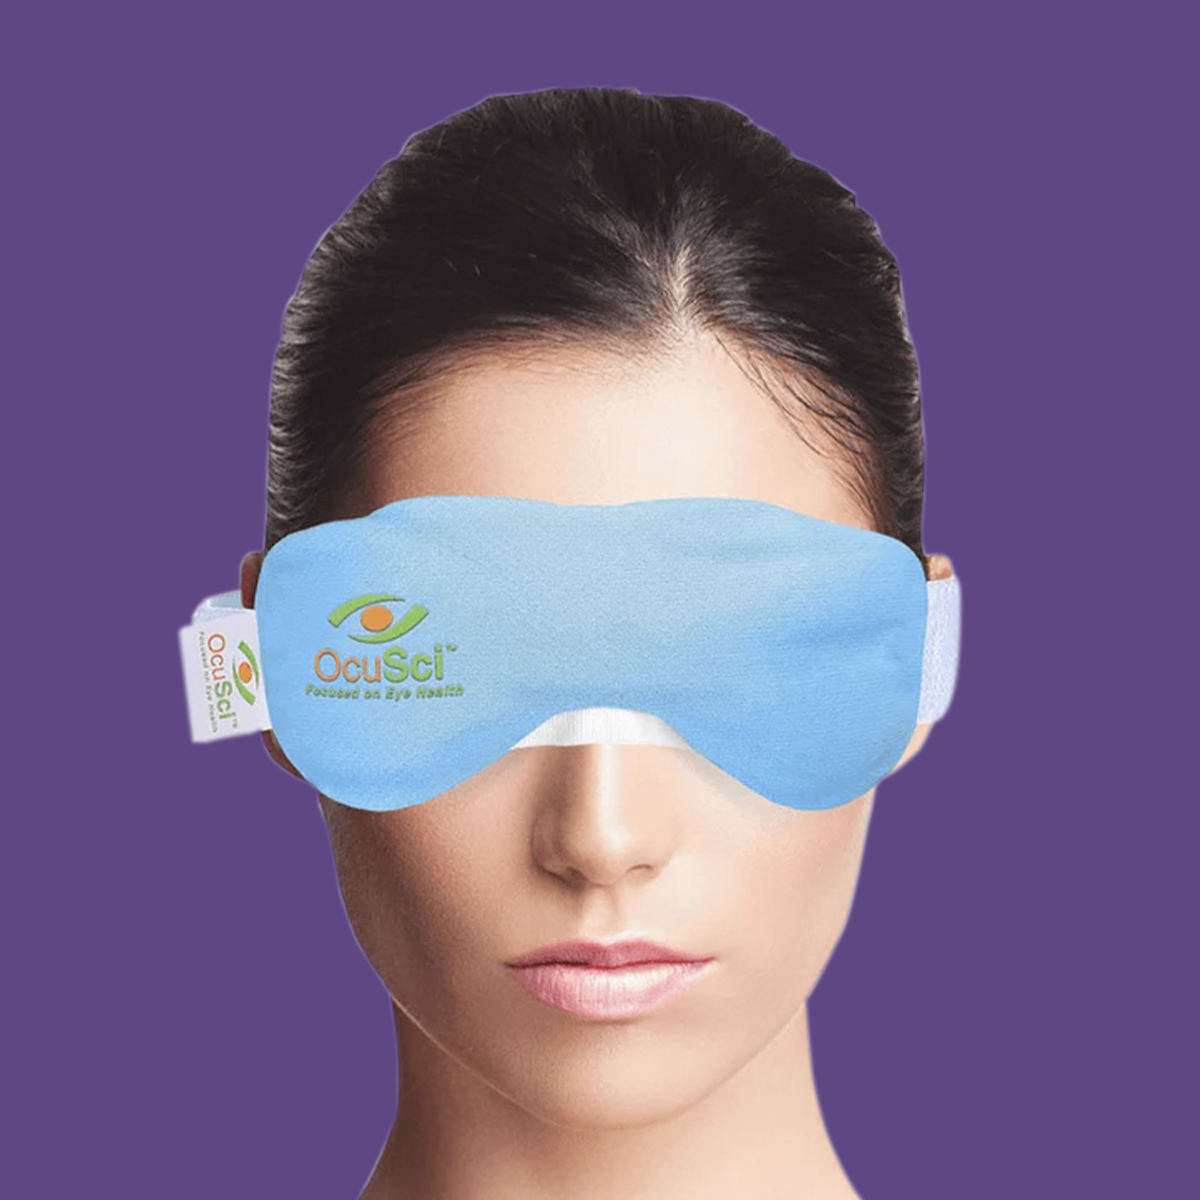 OcuSci Premium Heat & Cold Mask with HydroBlock, Microwavable, Washable Cover, Anti-Microbial